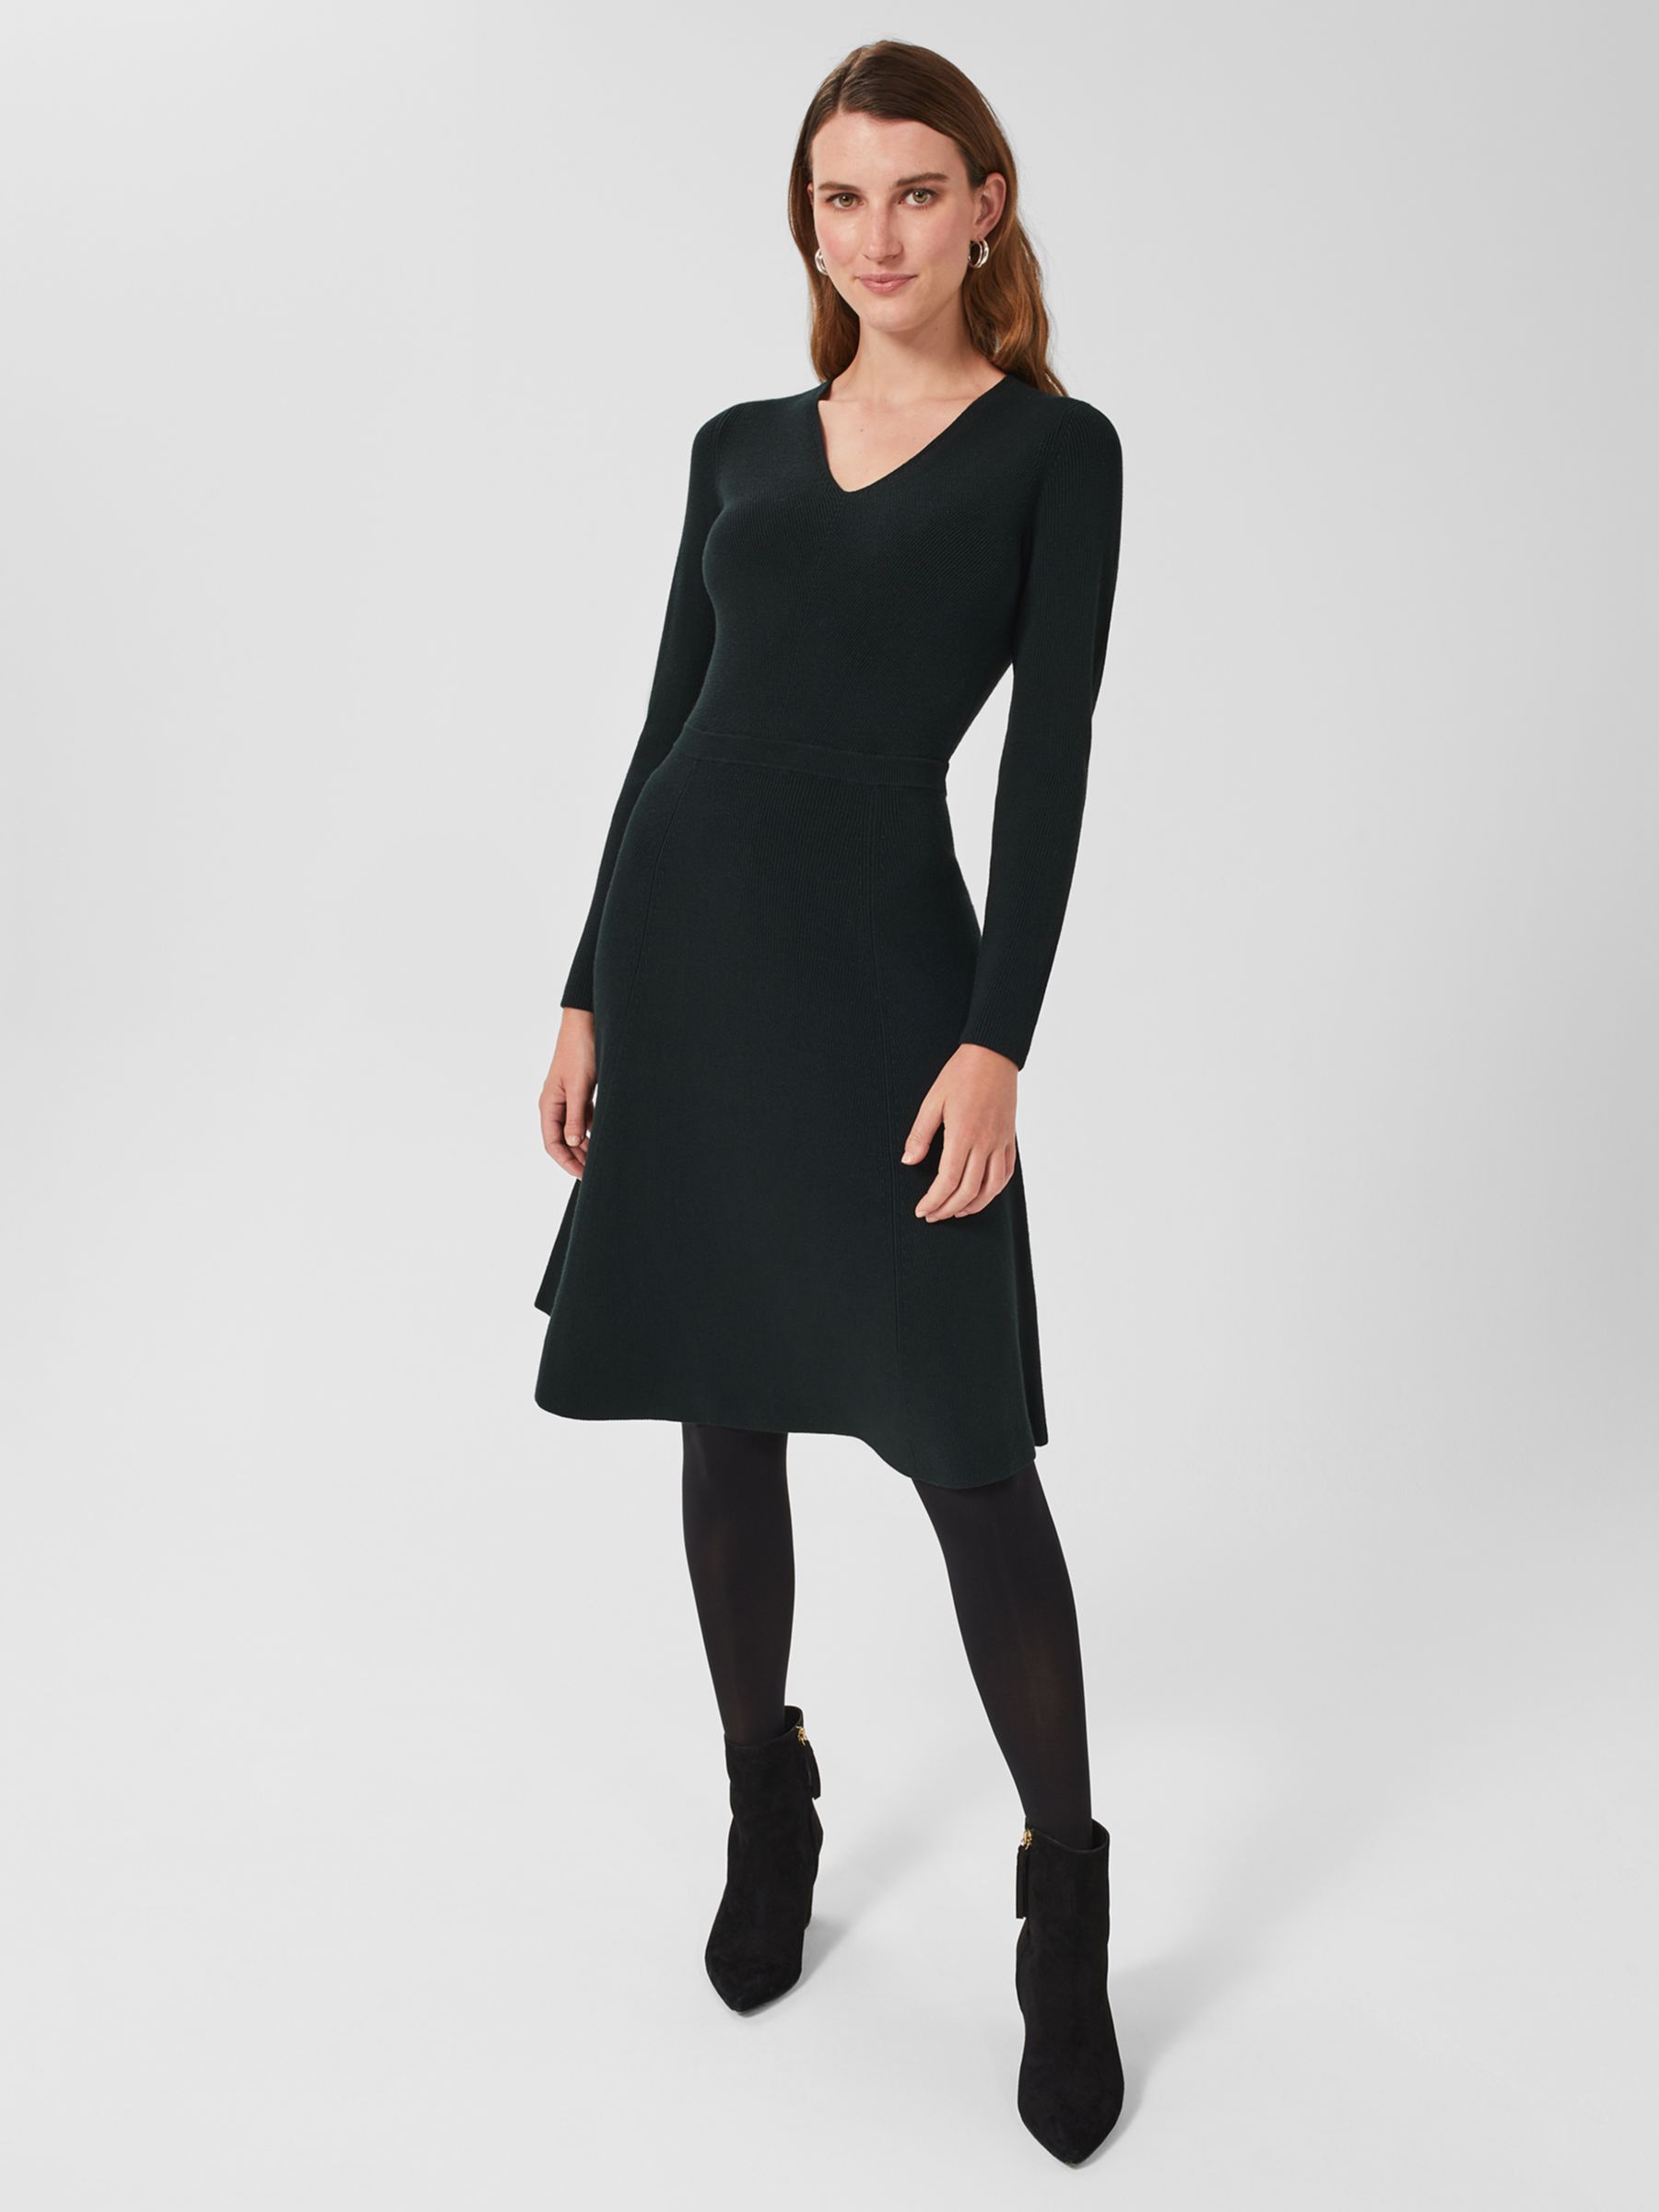 Hobbs Joy Knitted Dress, Forest Green at John Lewis & Partners